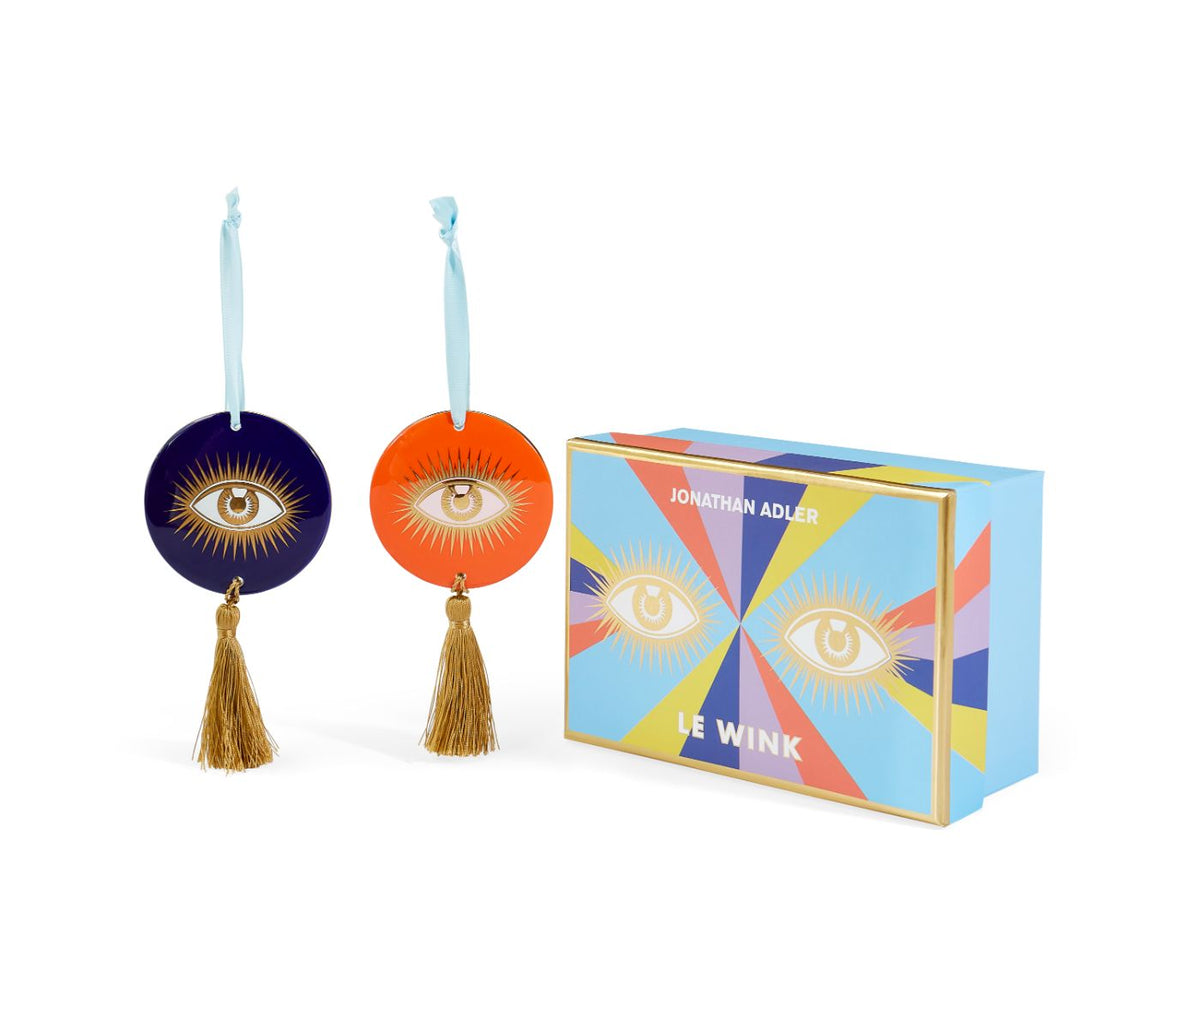 Le Wink Ornaments - Set of 2 by Jonathan Adler